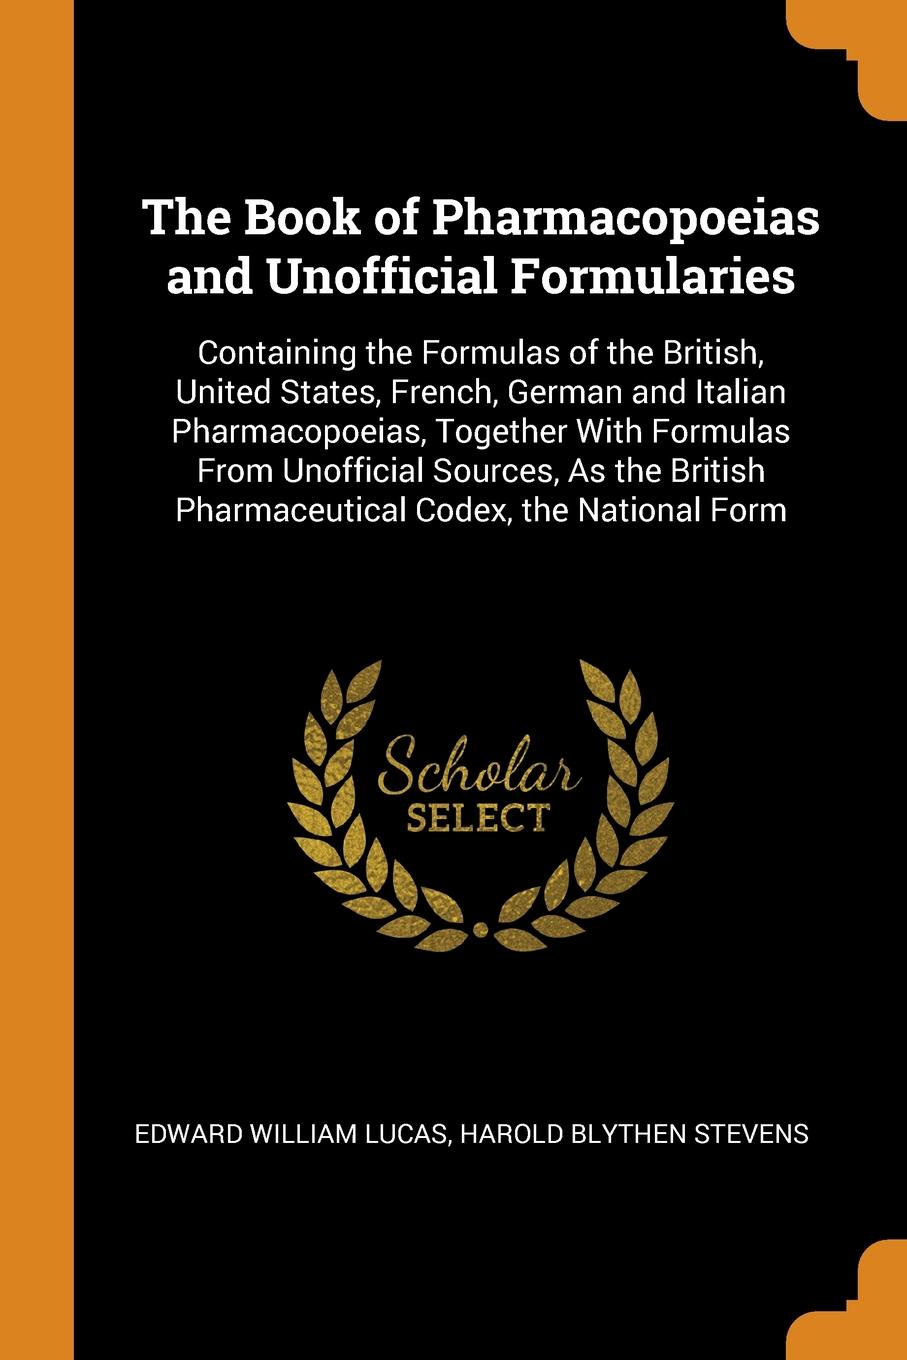 The Book of Pharmacopoeias and Unofficial Formularies. Containing the Formulas of the British, United States, French, German and Italian Pharmacopoeias, Together With Formulas From Unofficial Sources, As the British Pharmaceutical Codex, the Natio...